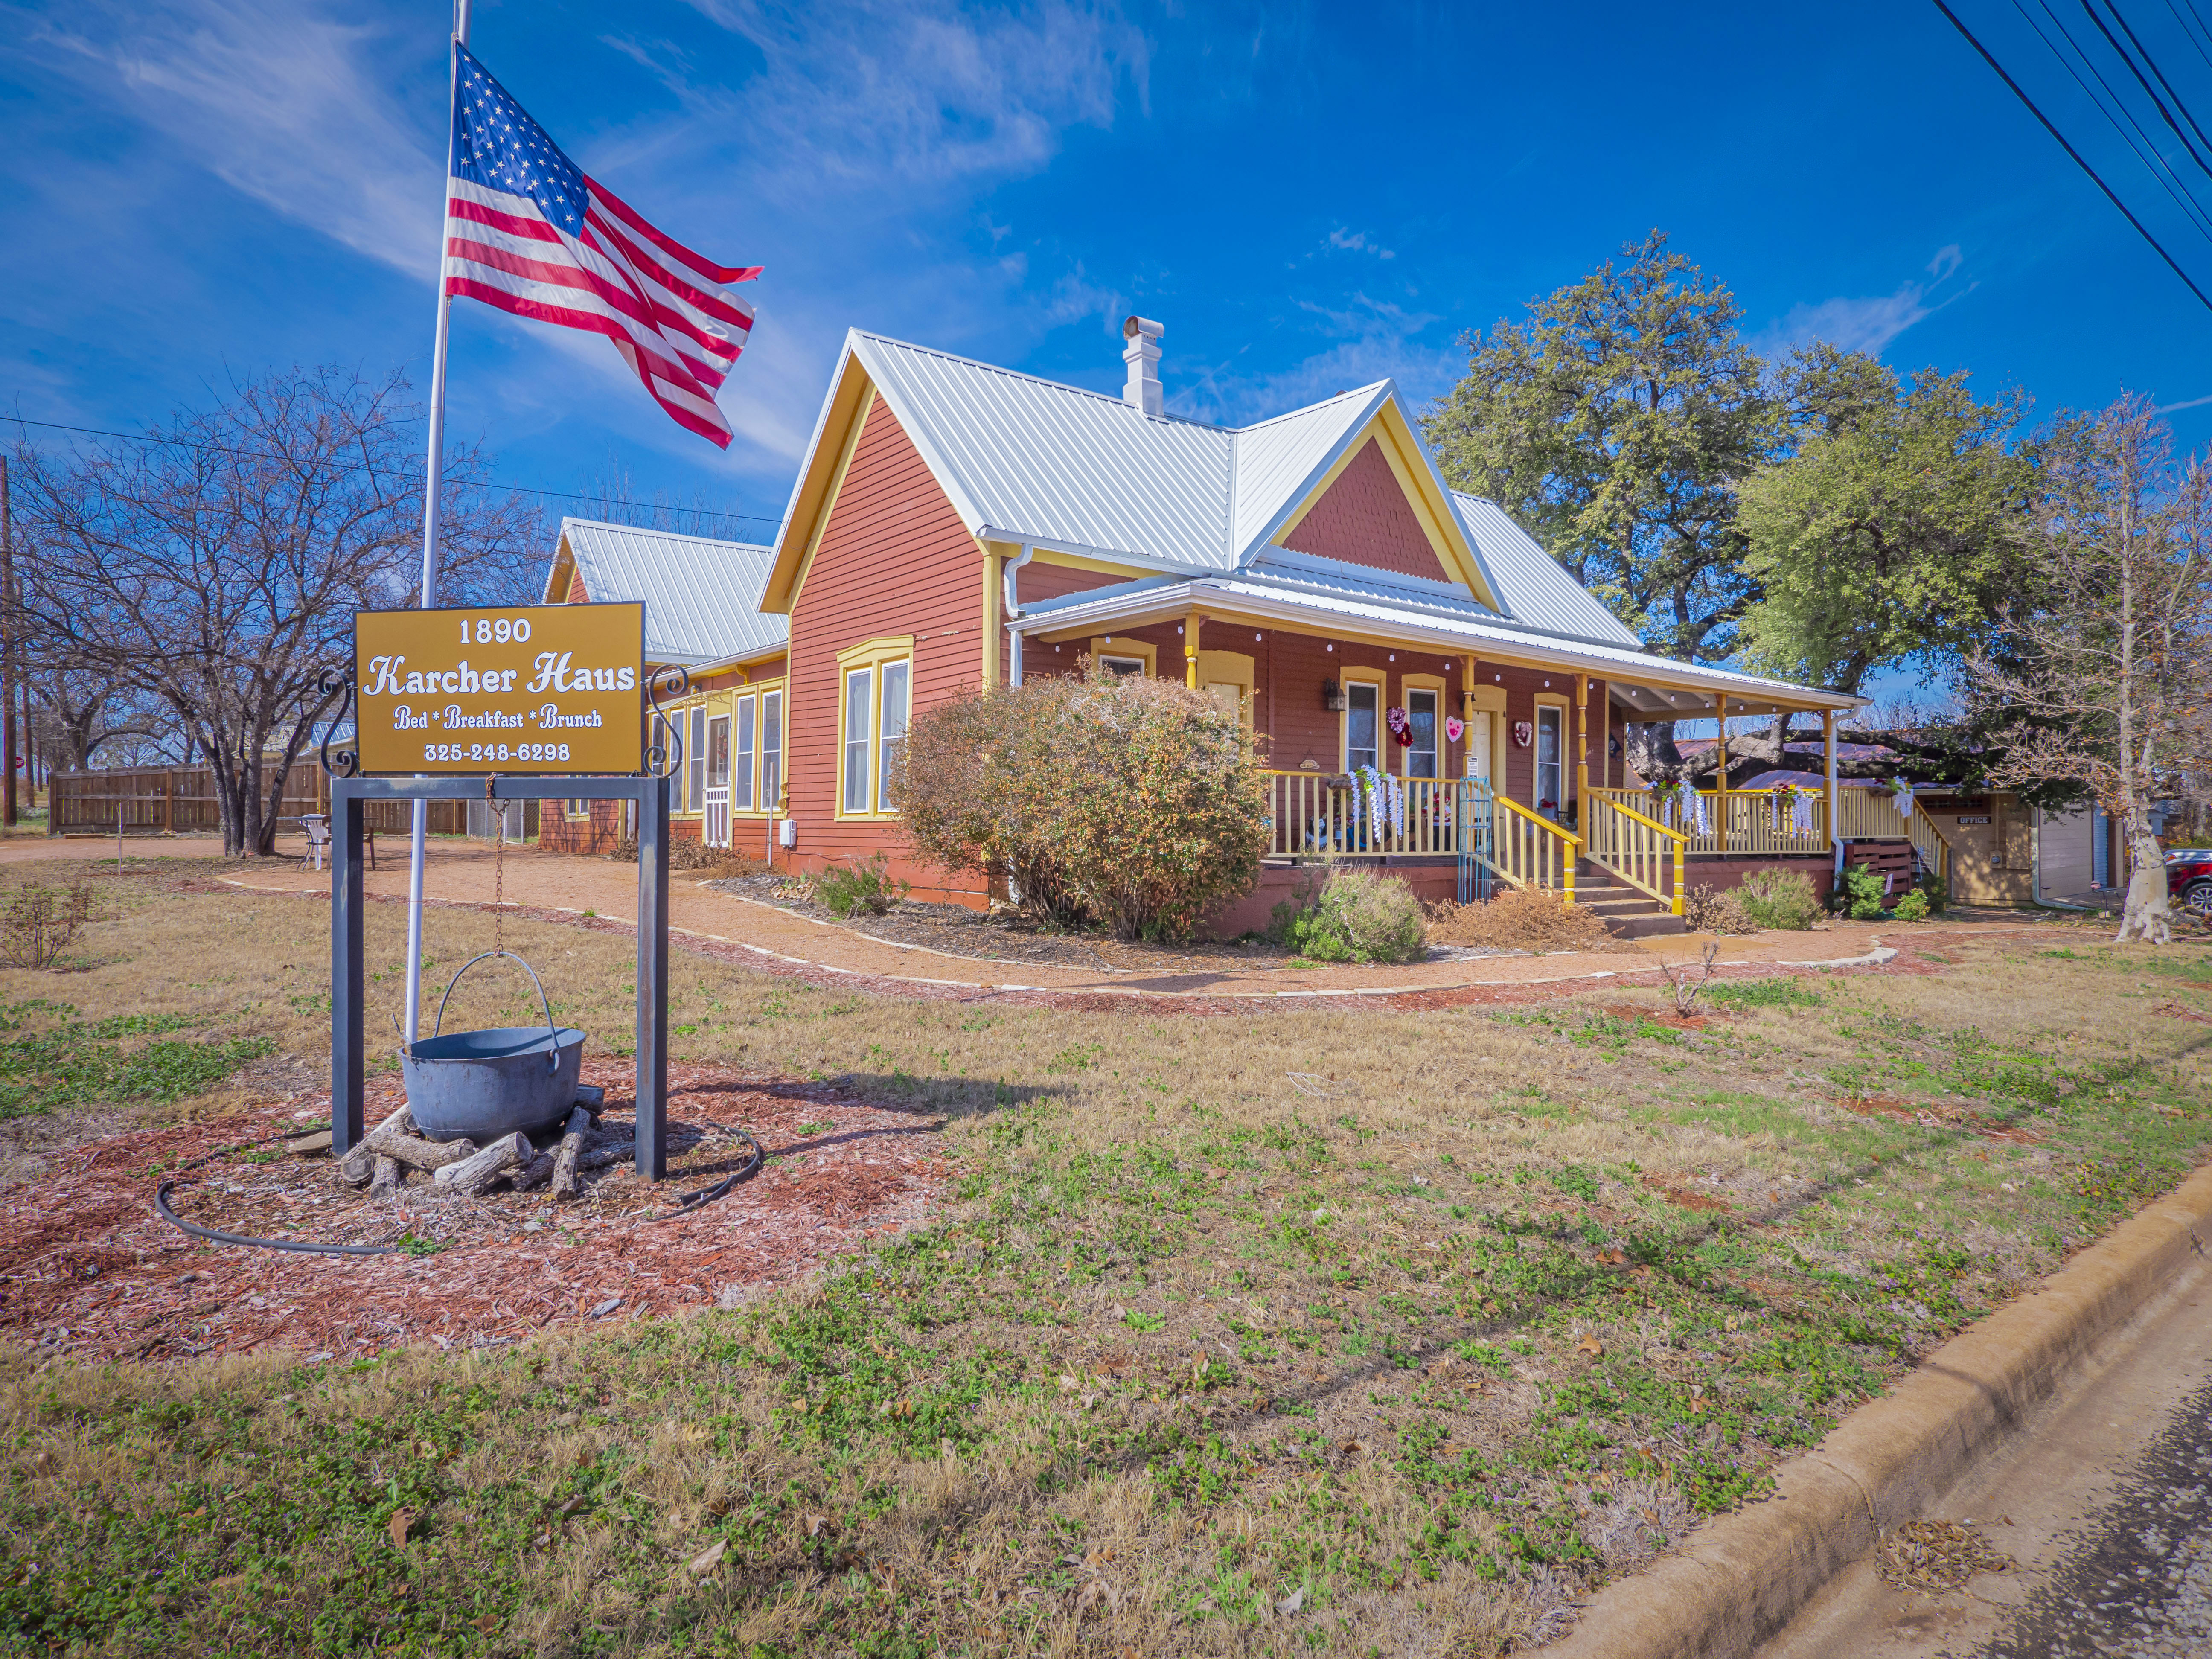 Texas bed and breakfast inn for sale - 1890 Karcher Haus